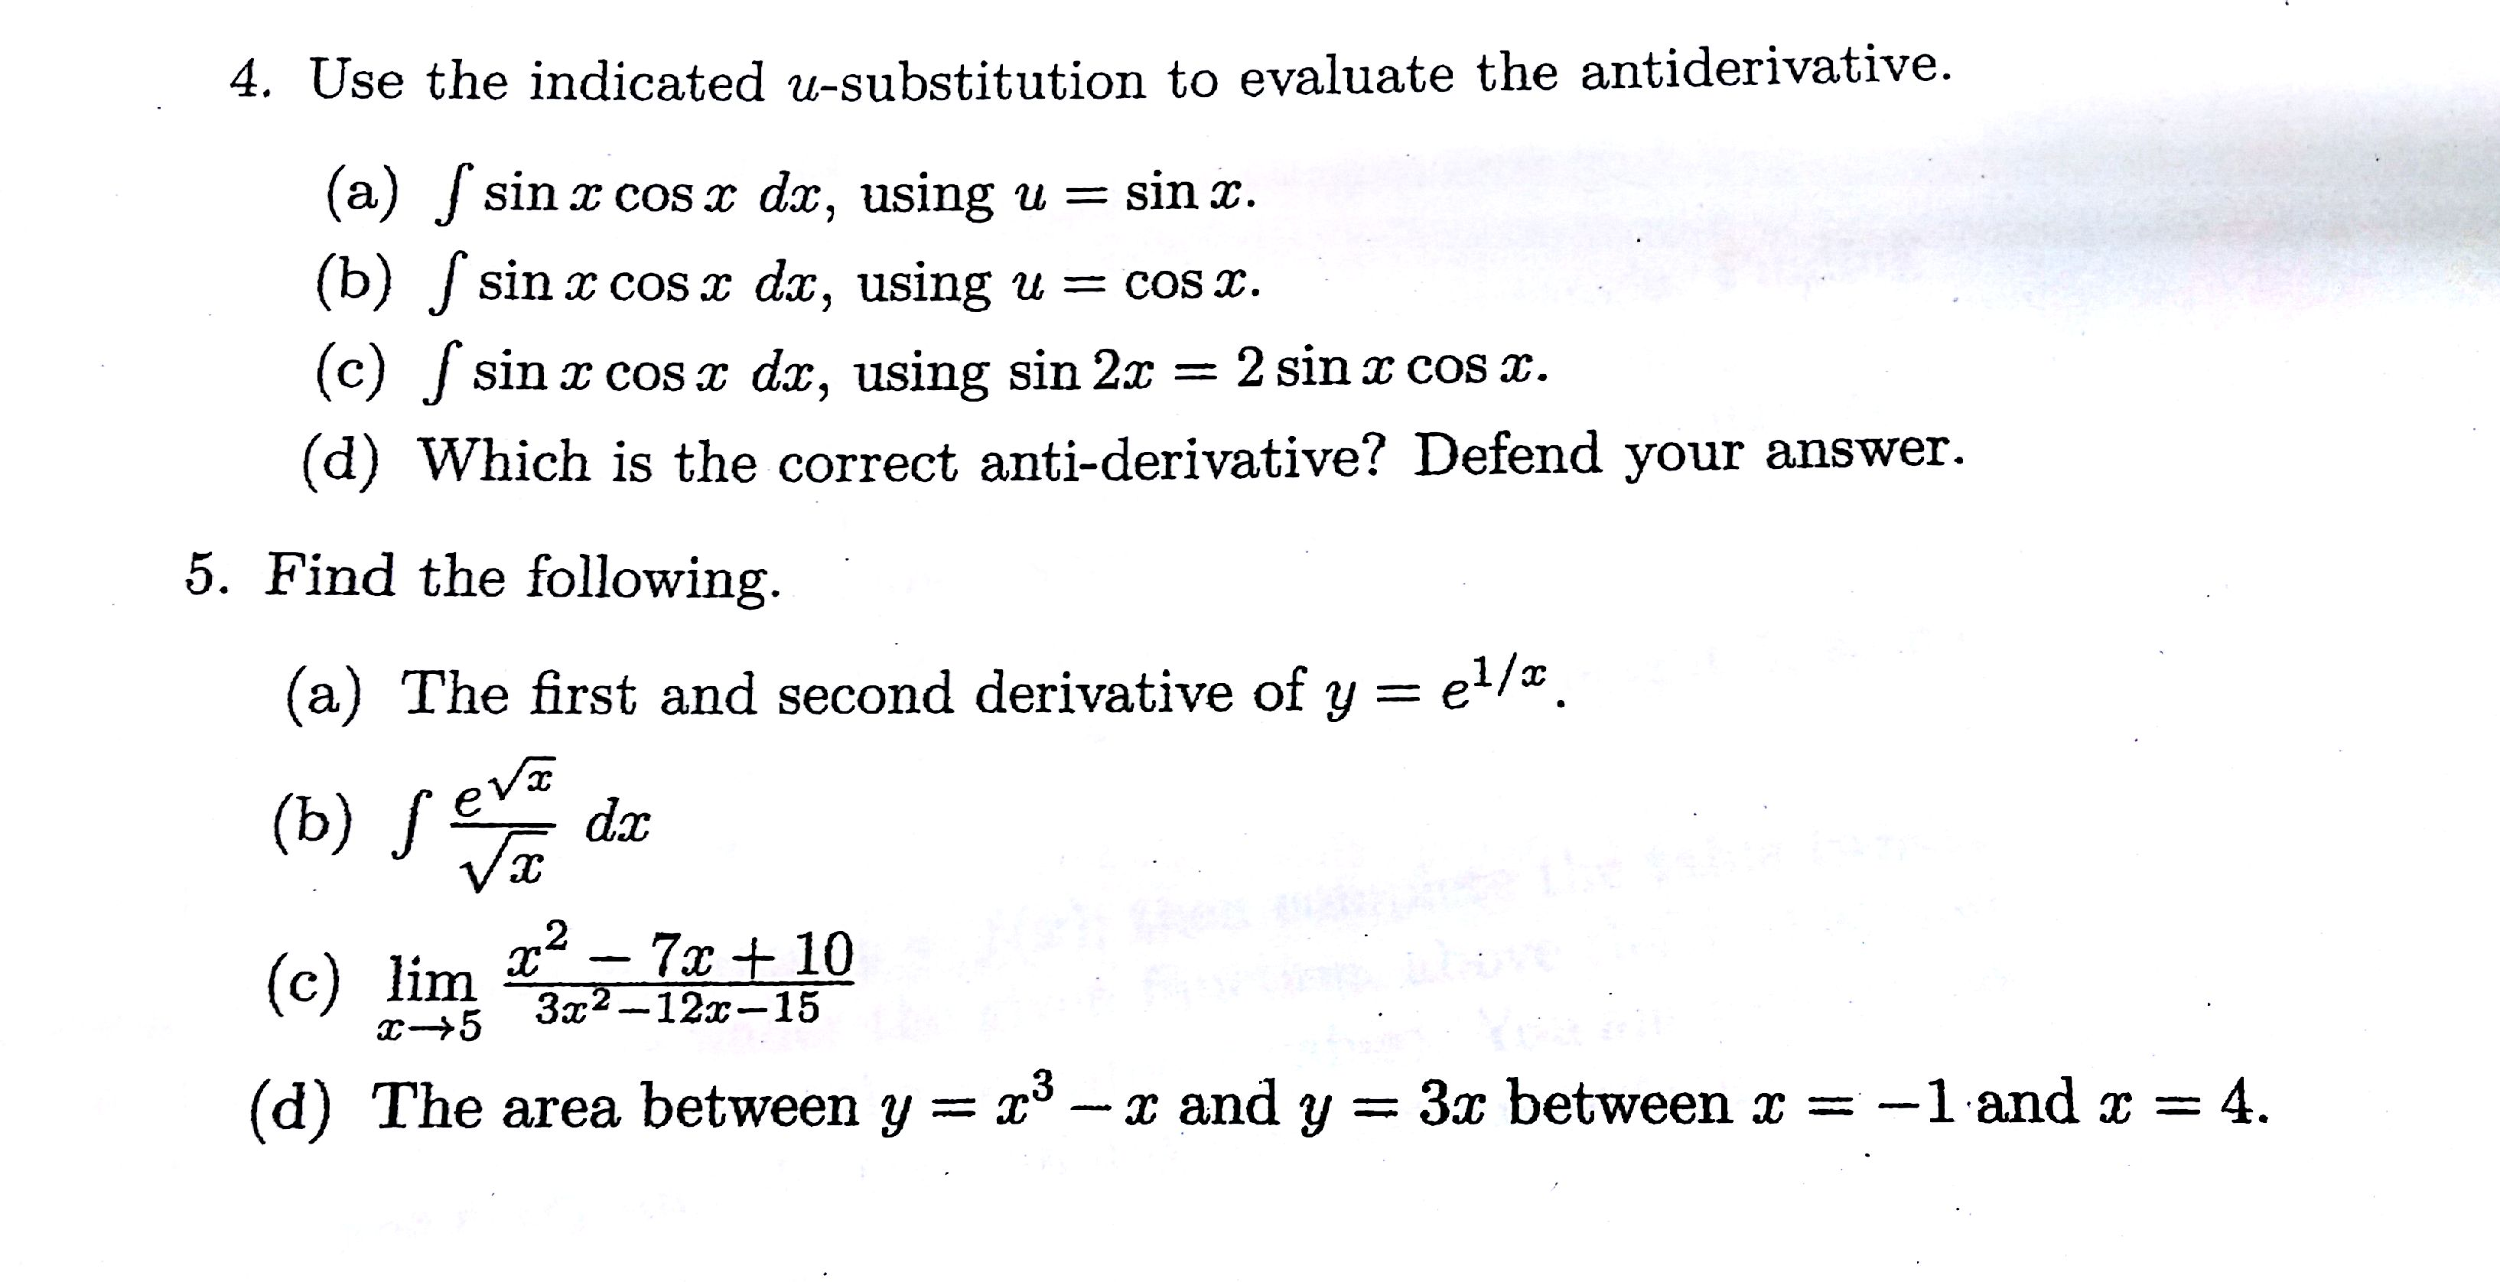 What is the antiderivative of sinx?